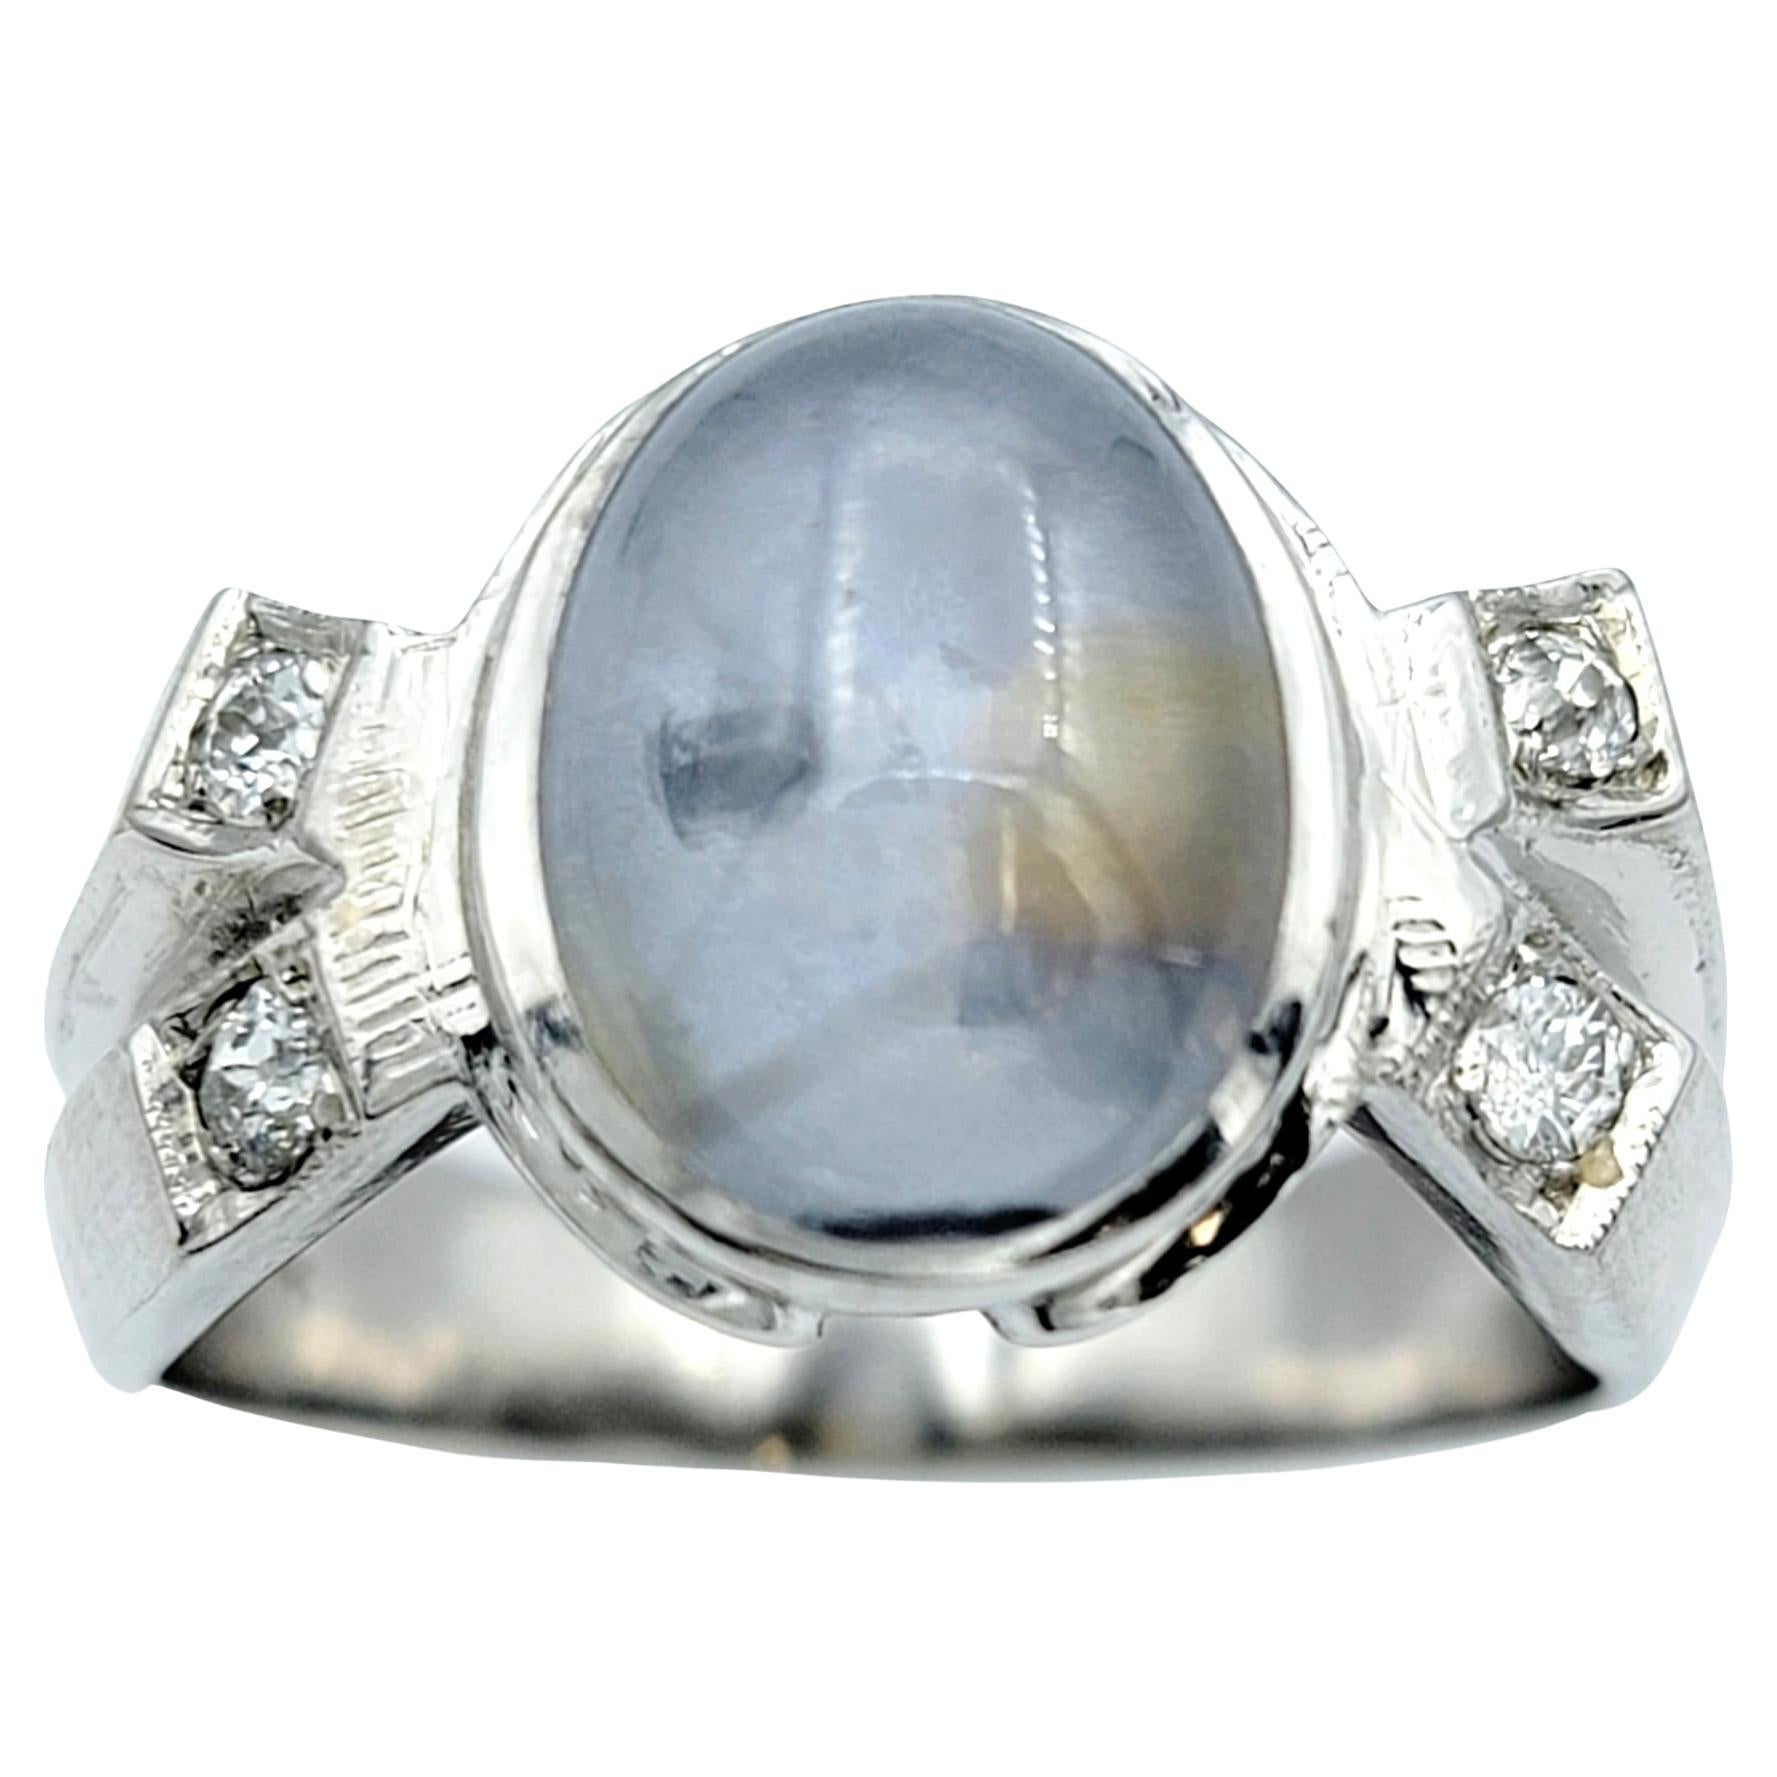 Oval Cabochon Star Sapphire and Diamond Cocktail Ring in 14 Karat White Gold